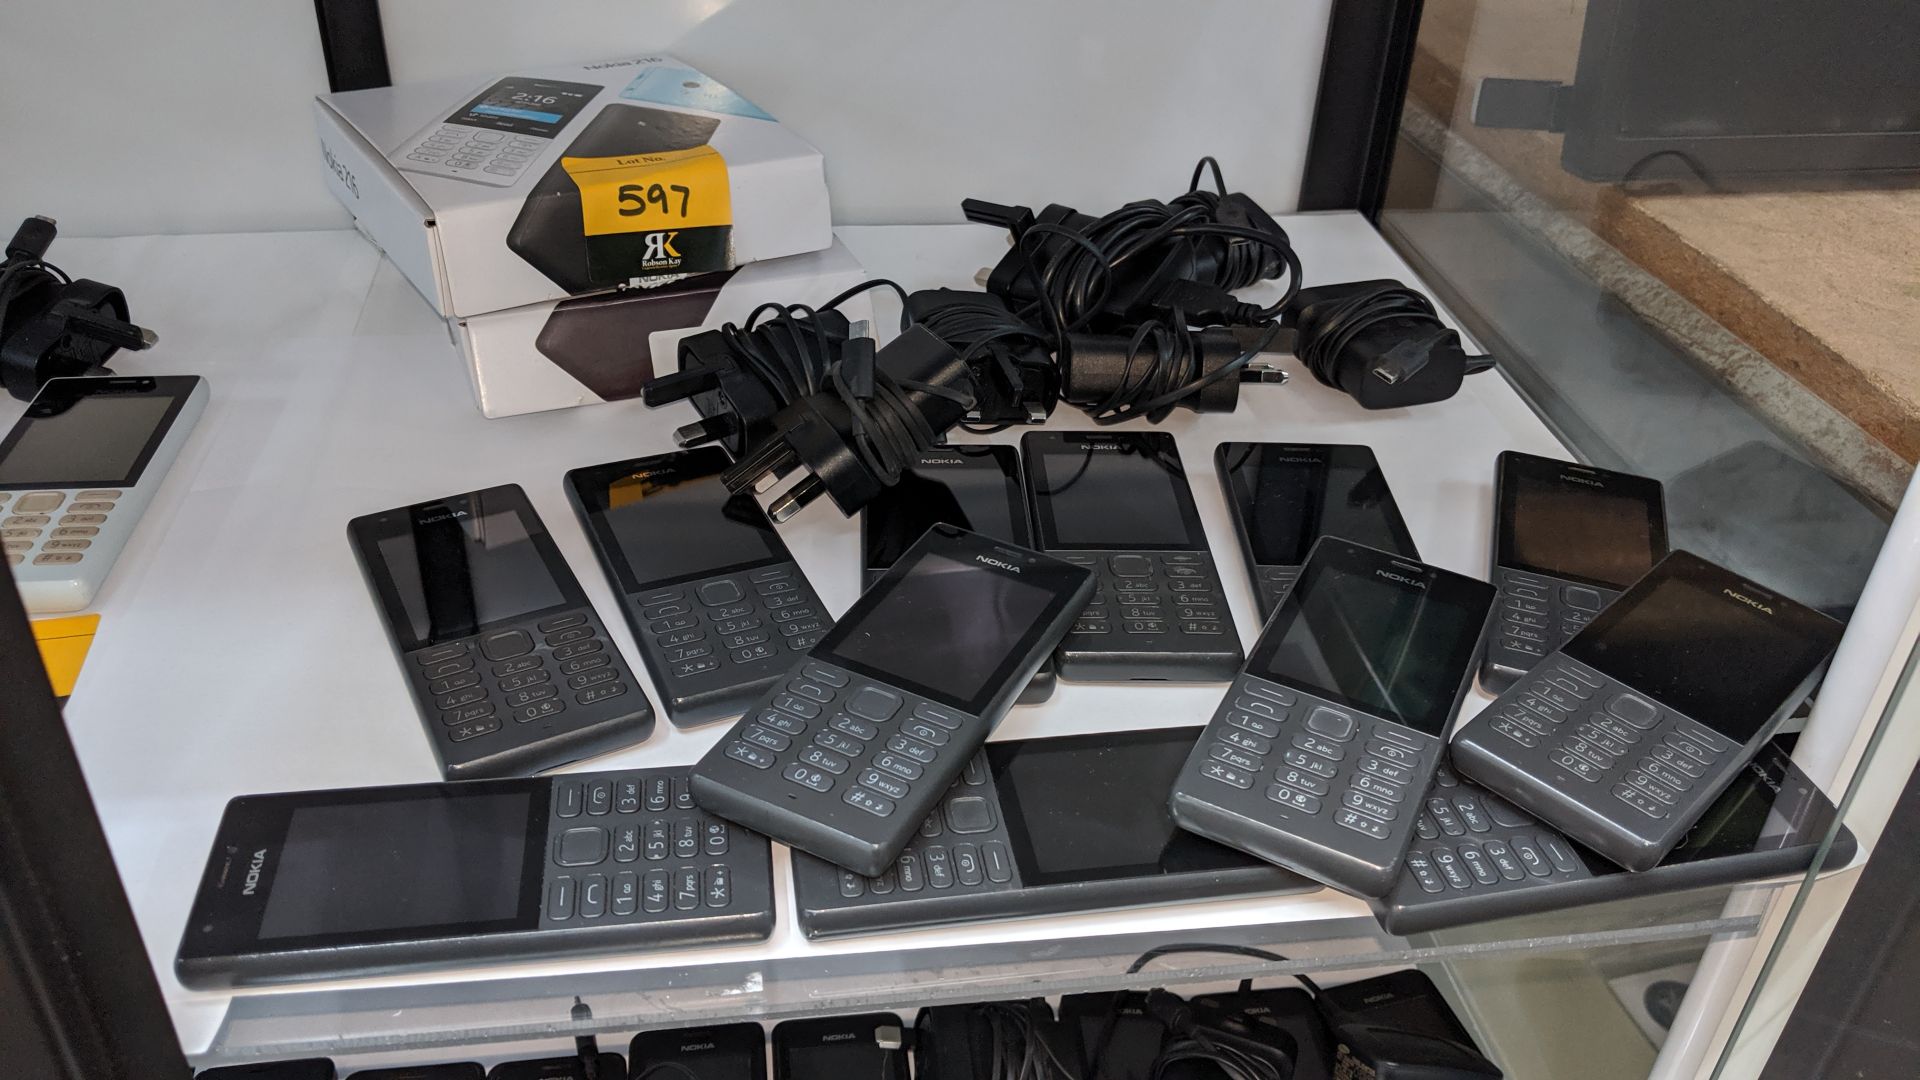 12 off Nokia 216 black mobile phones including 7 chargers & 2 boxes. We believe these phones were - Image 2 of 6